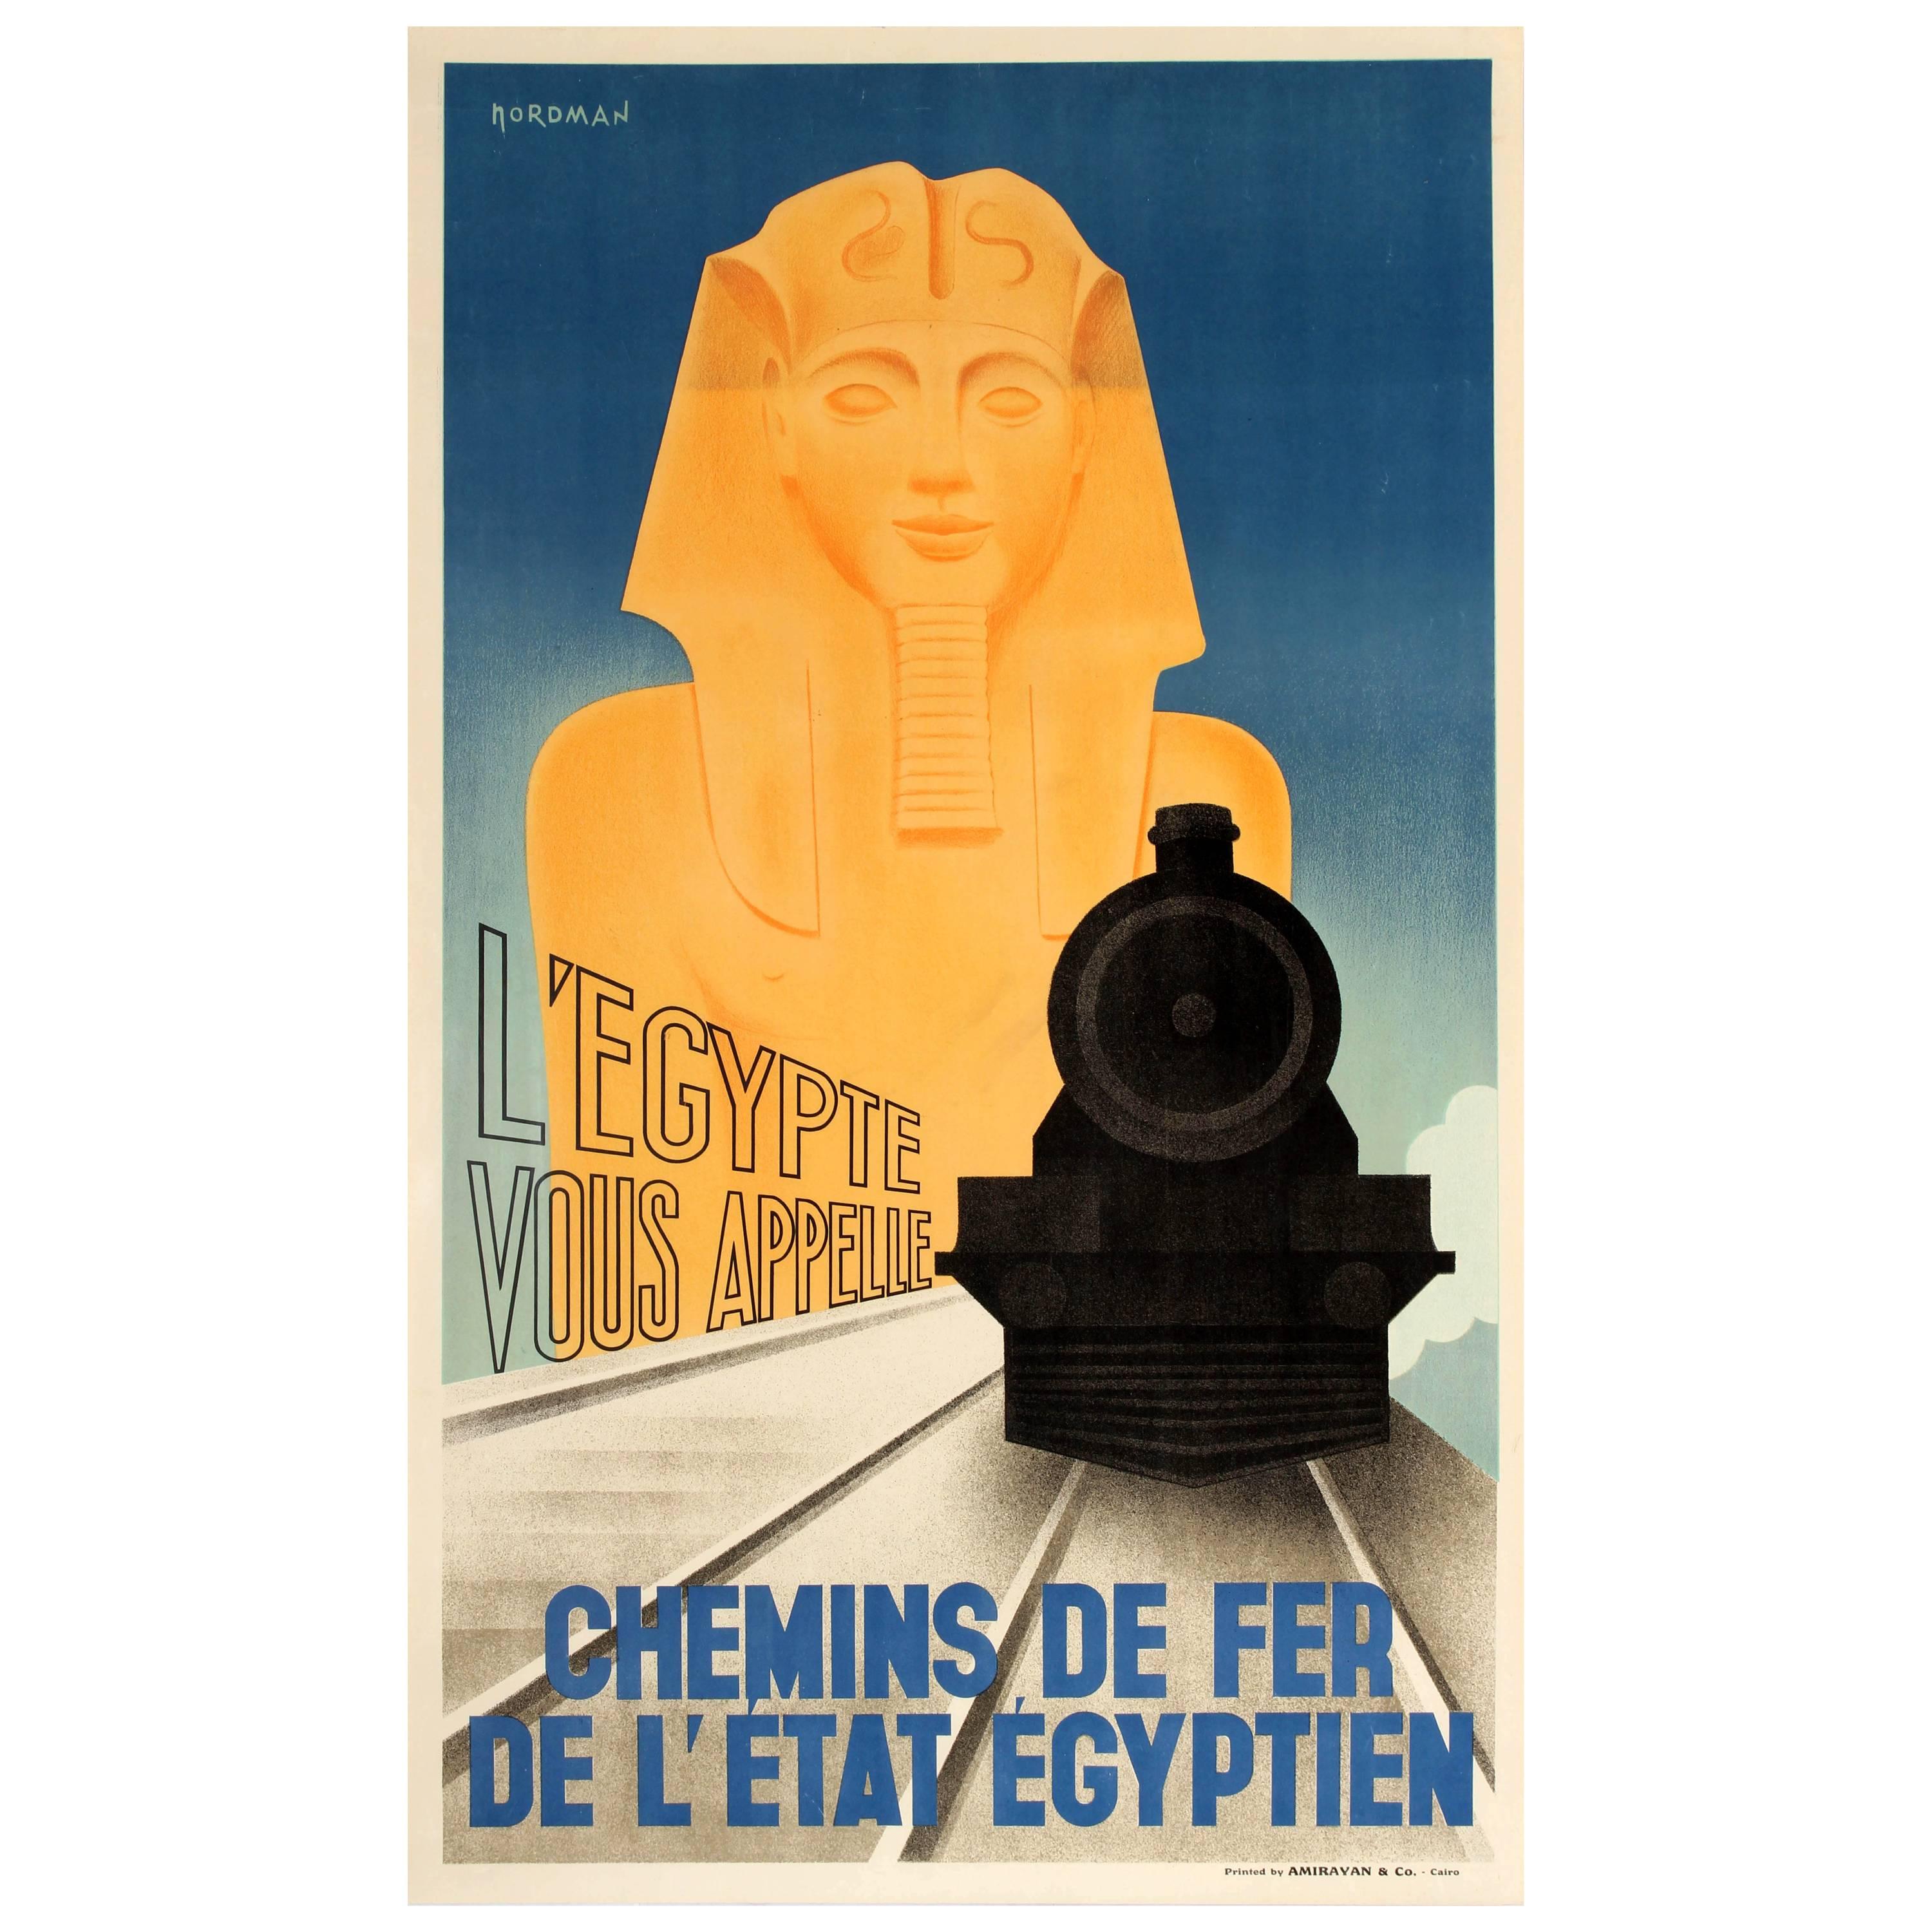 Reproduction Vintage Art Deco Travel Poster 1935 Egypt for Cairo by Rail